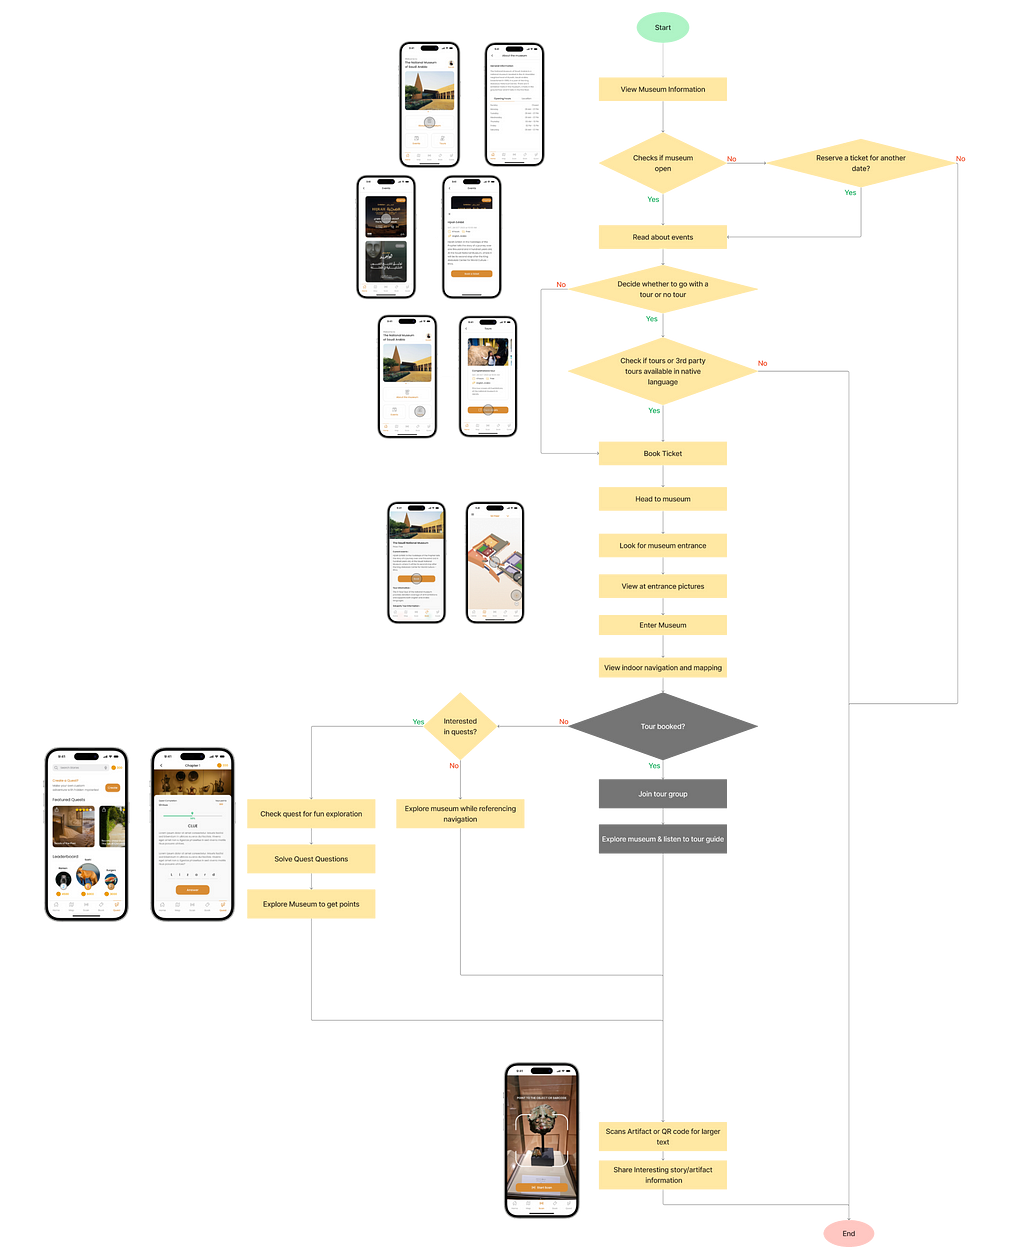 The image depicts a structured sequence of screens, illustrating the step-by-step journey for Sarah as she interacts with the Saudi National Museum application.